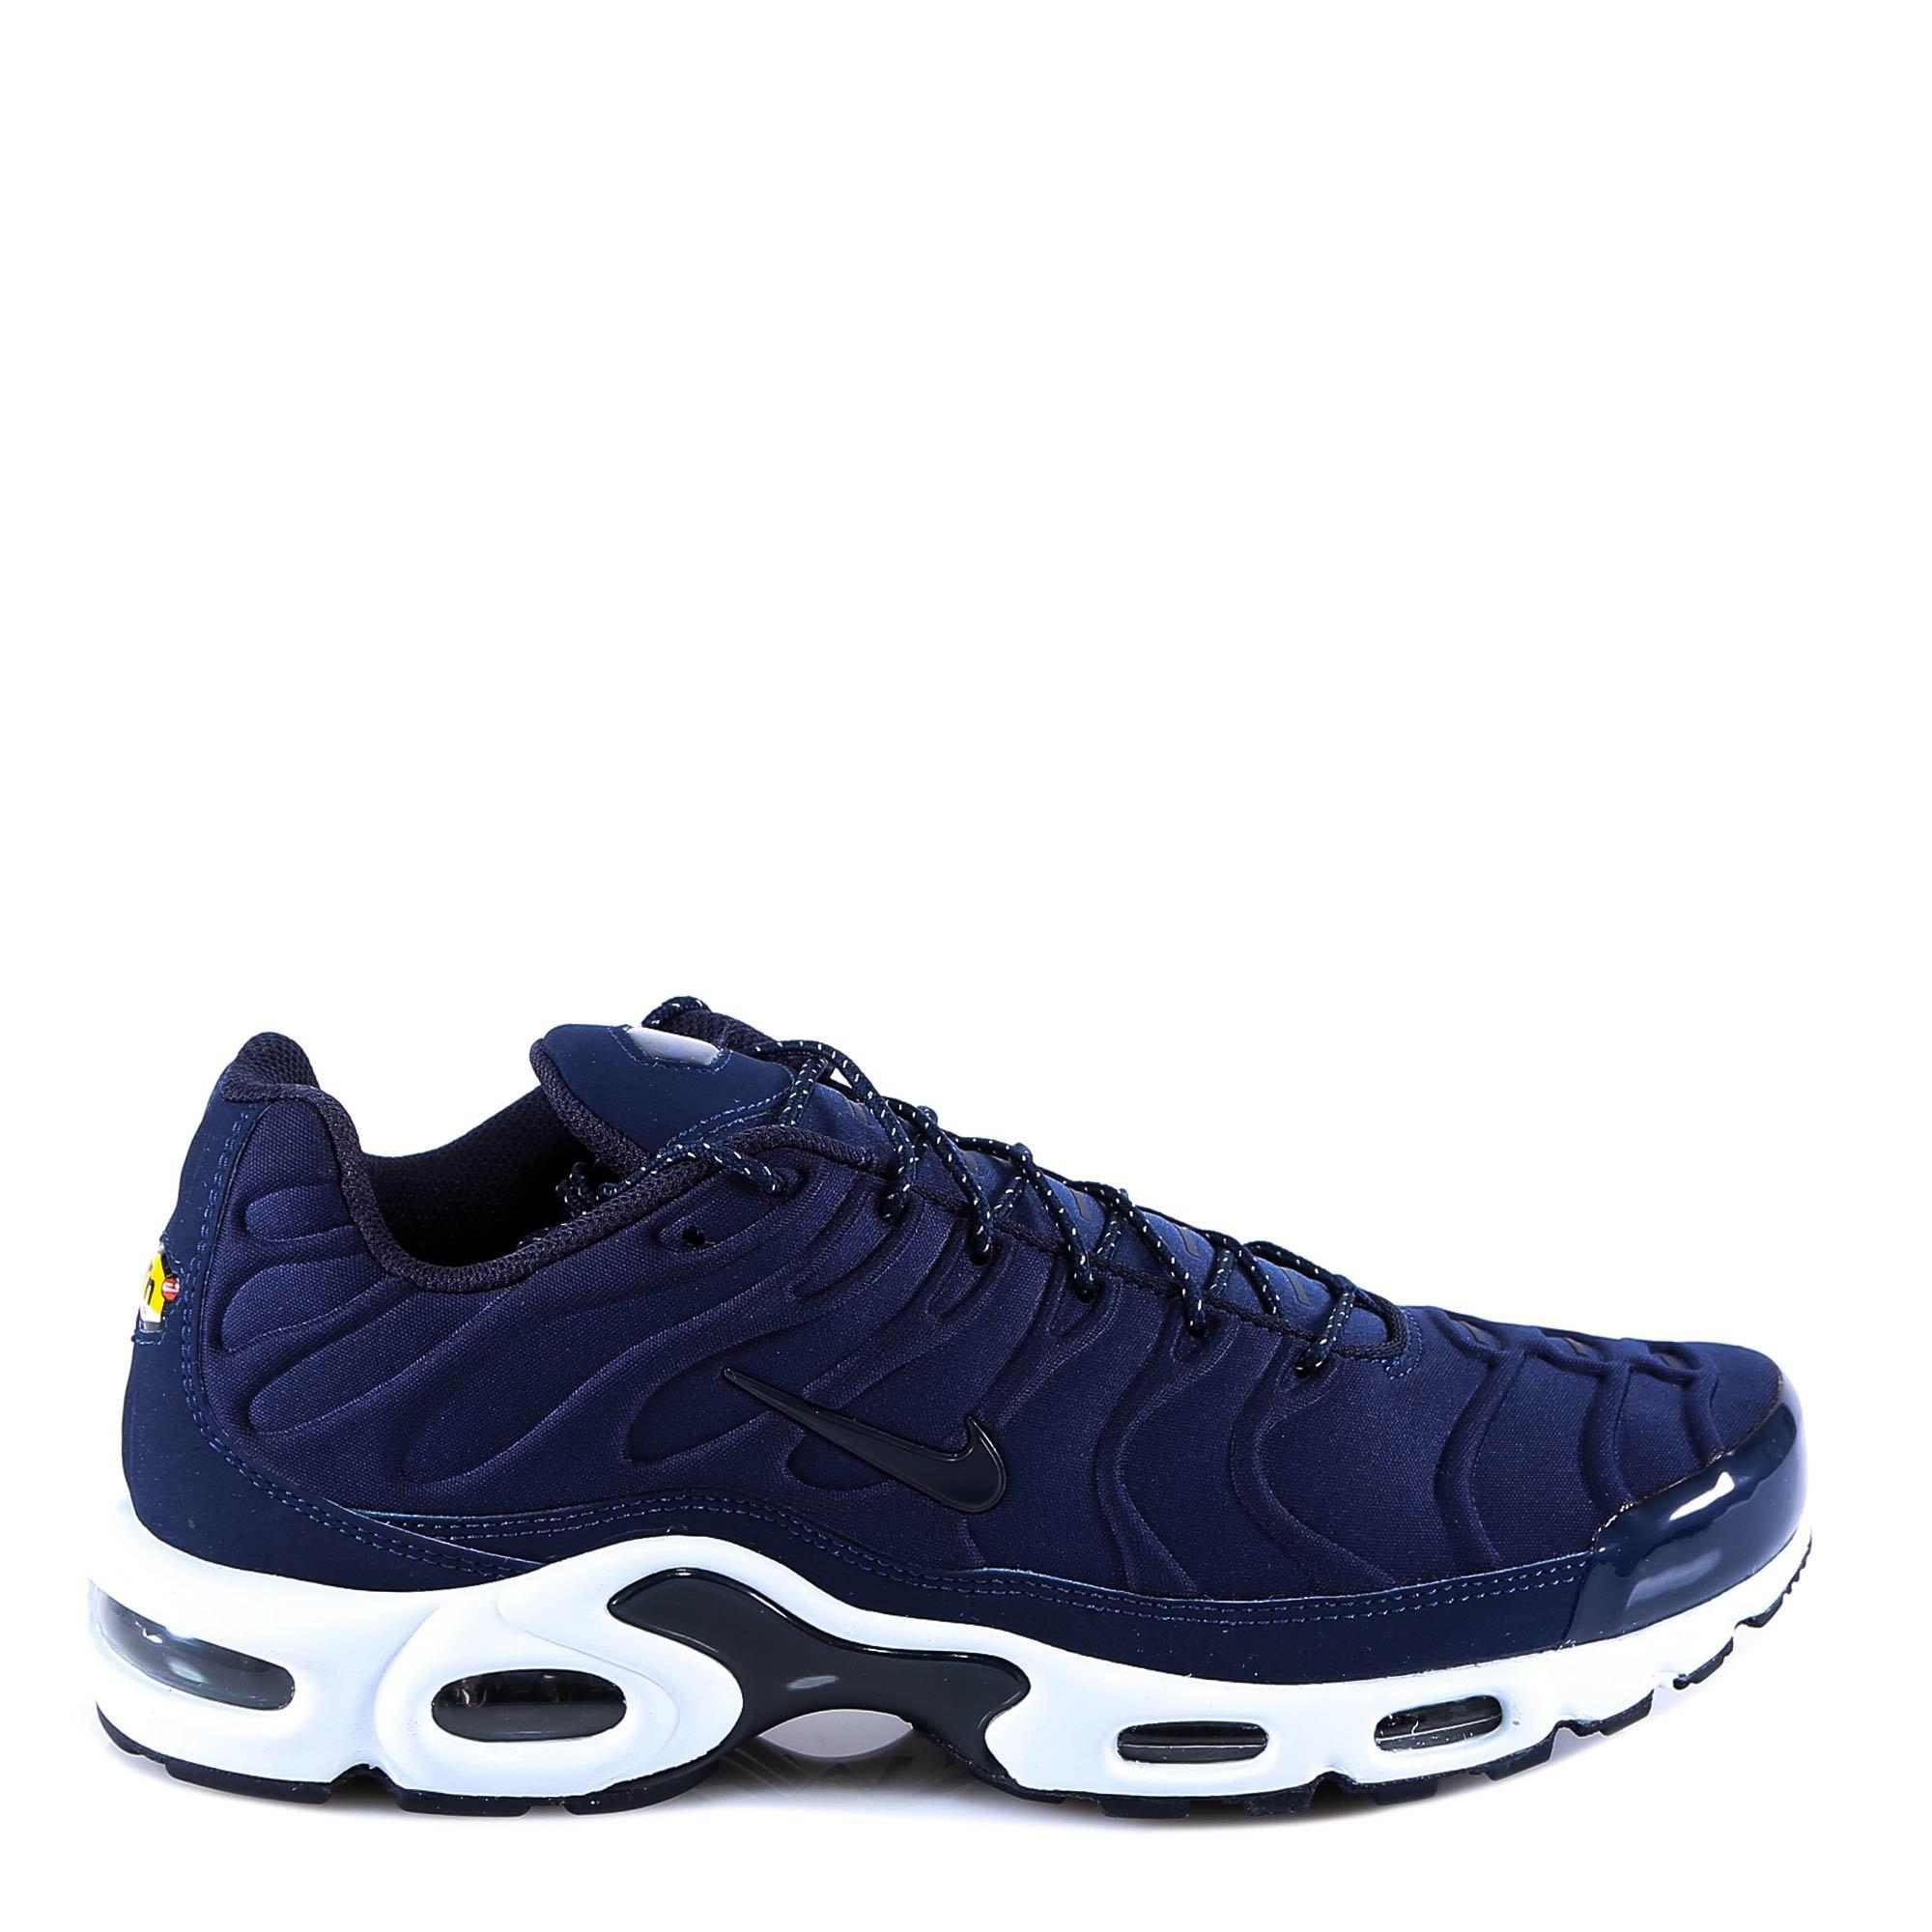 Nike Tn Air Max Plus Sneakers in Blue for | Lyst